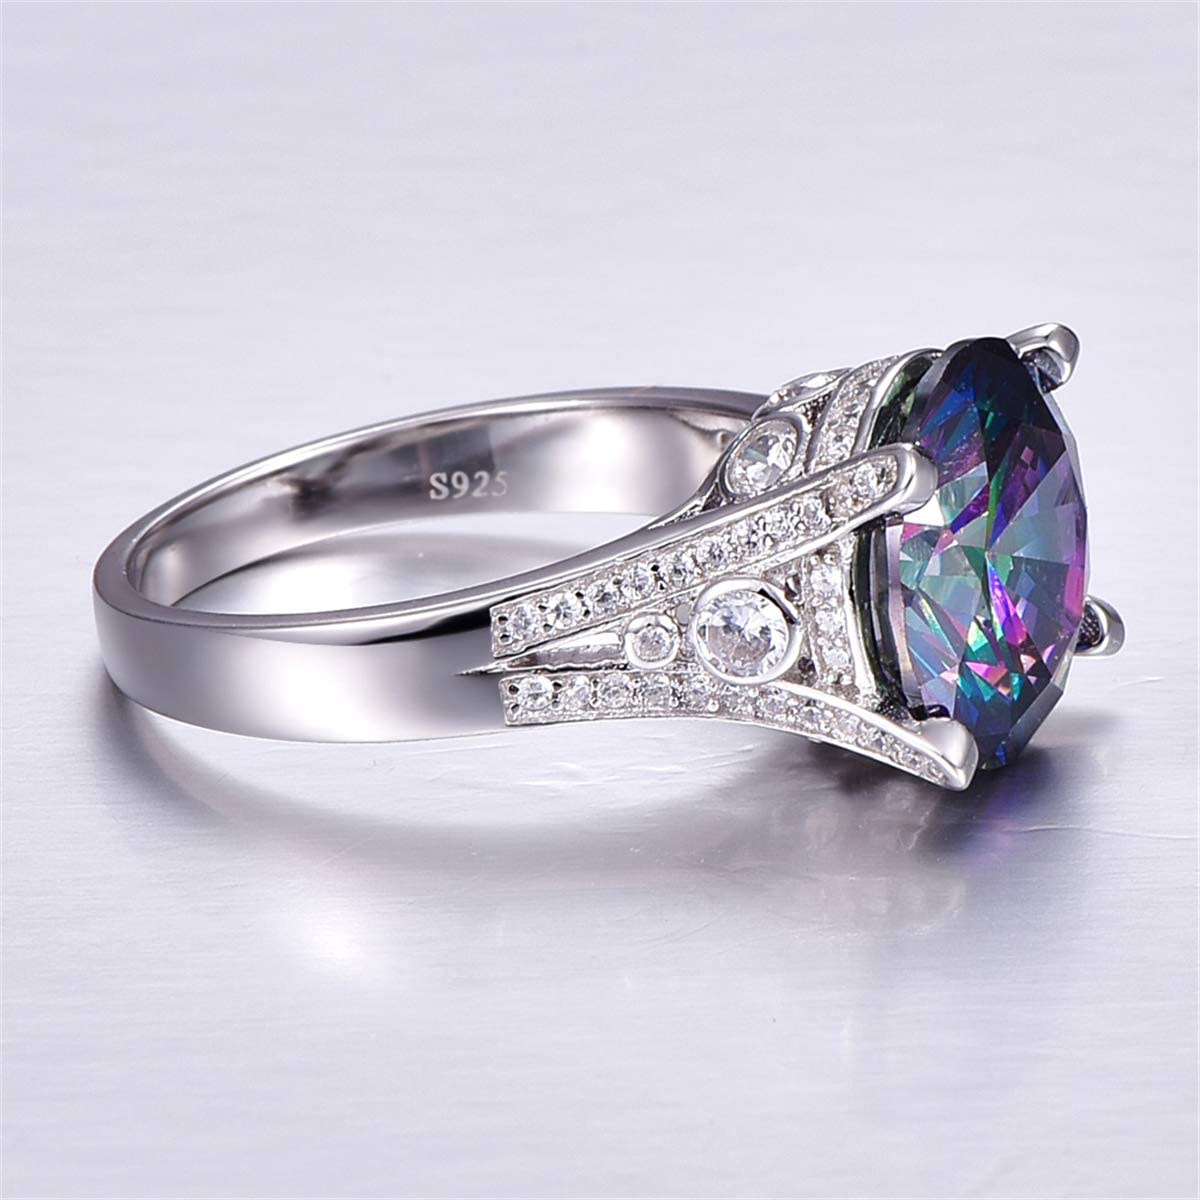 925 Sterling Silver Rings for Her 10.5Ct round Cut Created Mystic Rainbow Topaz Cubic Zirconia CZ Solitaire Promise Engagement Ring